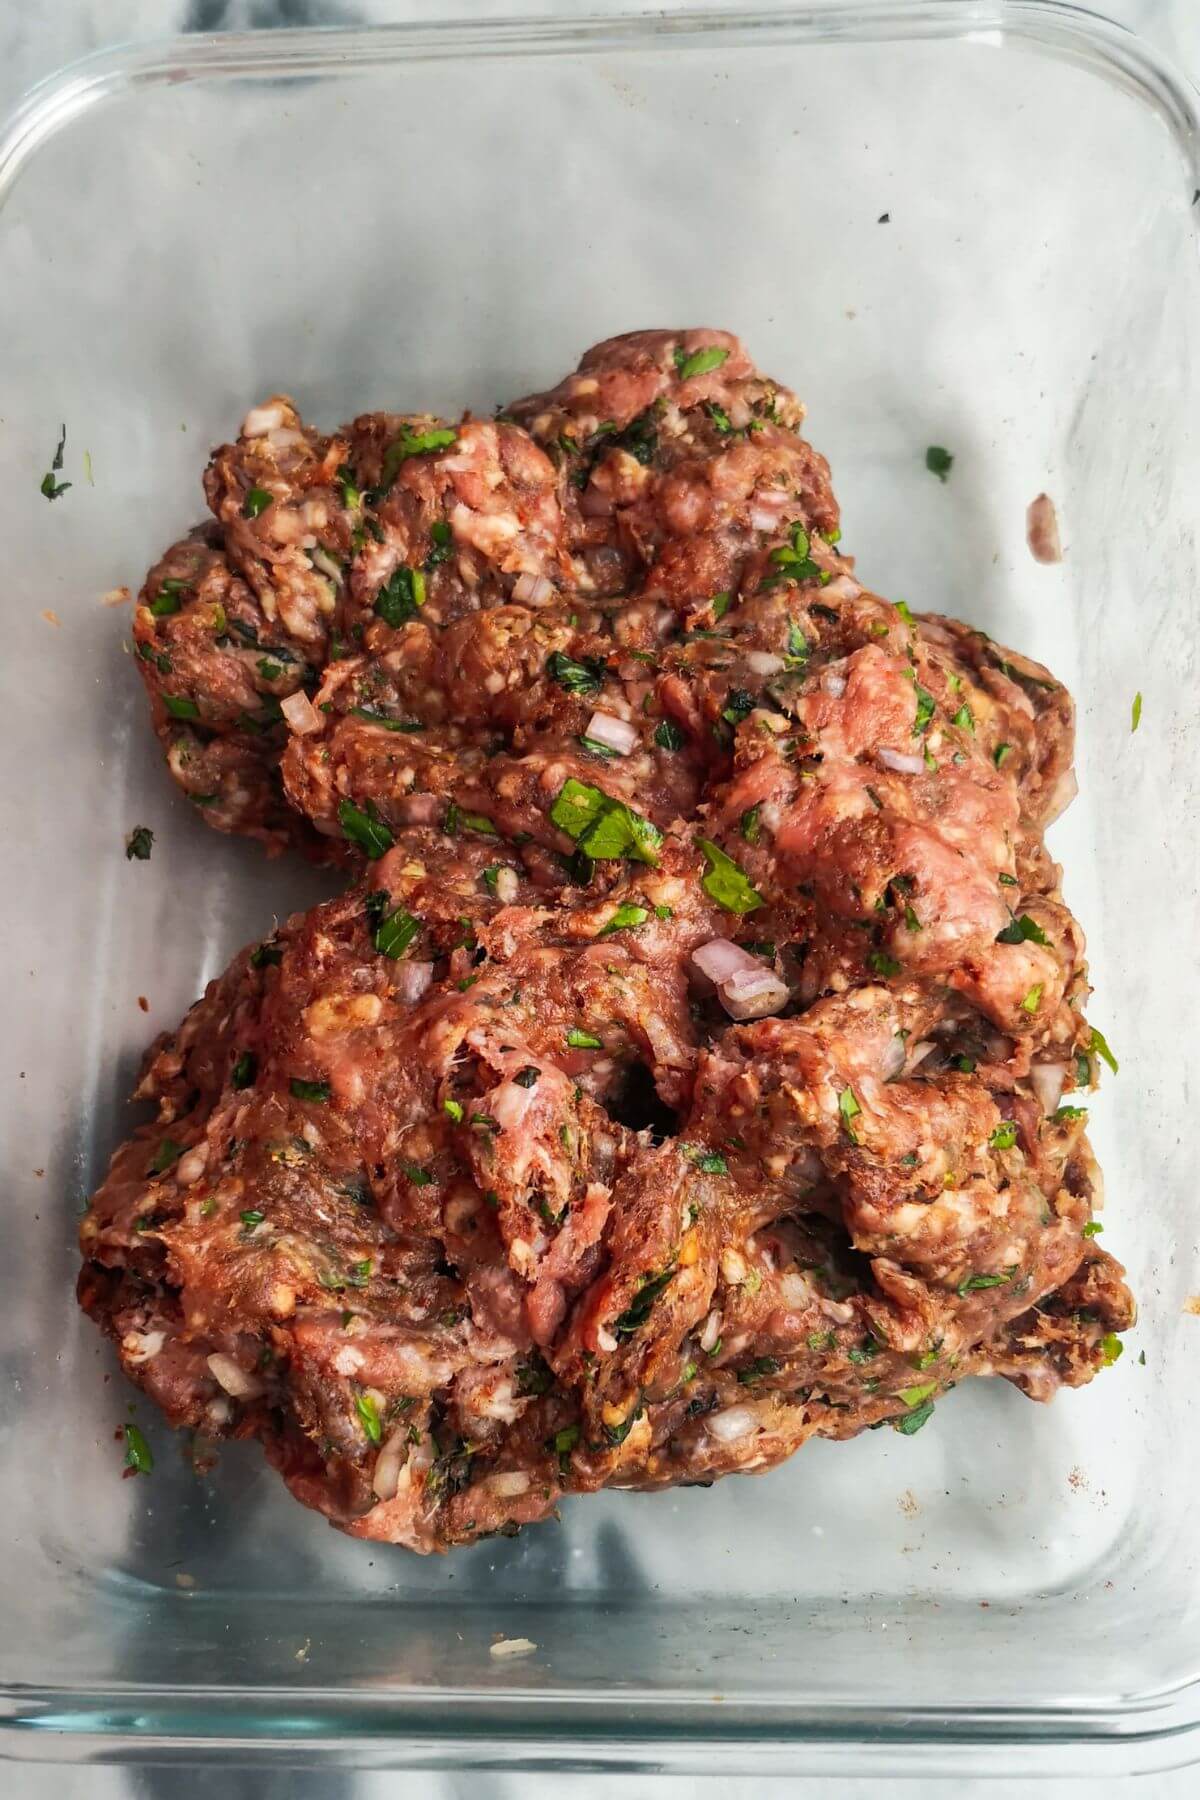 Lamb kofta mix all mixed together in a large glass container.